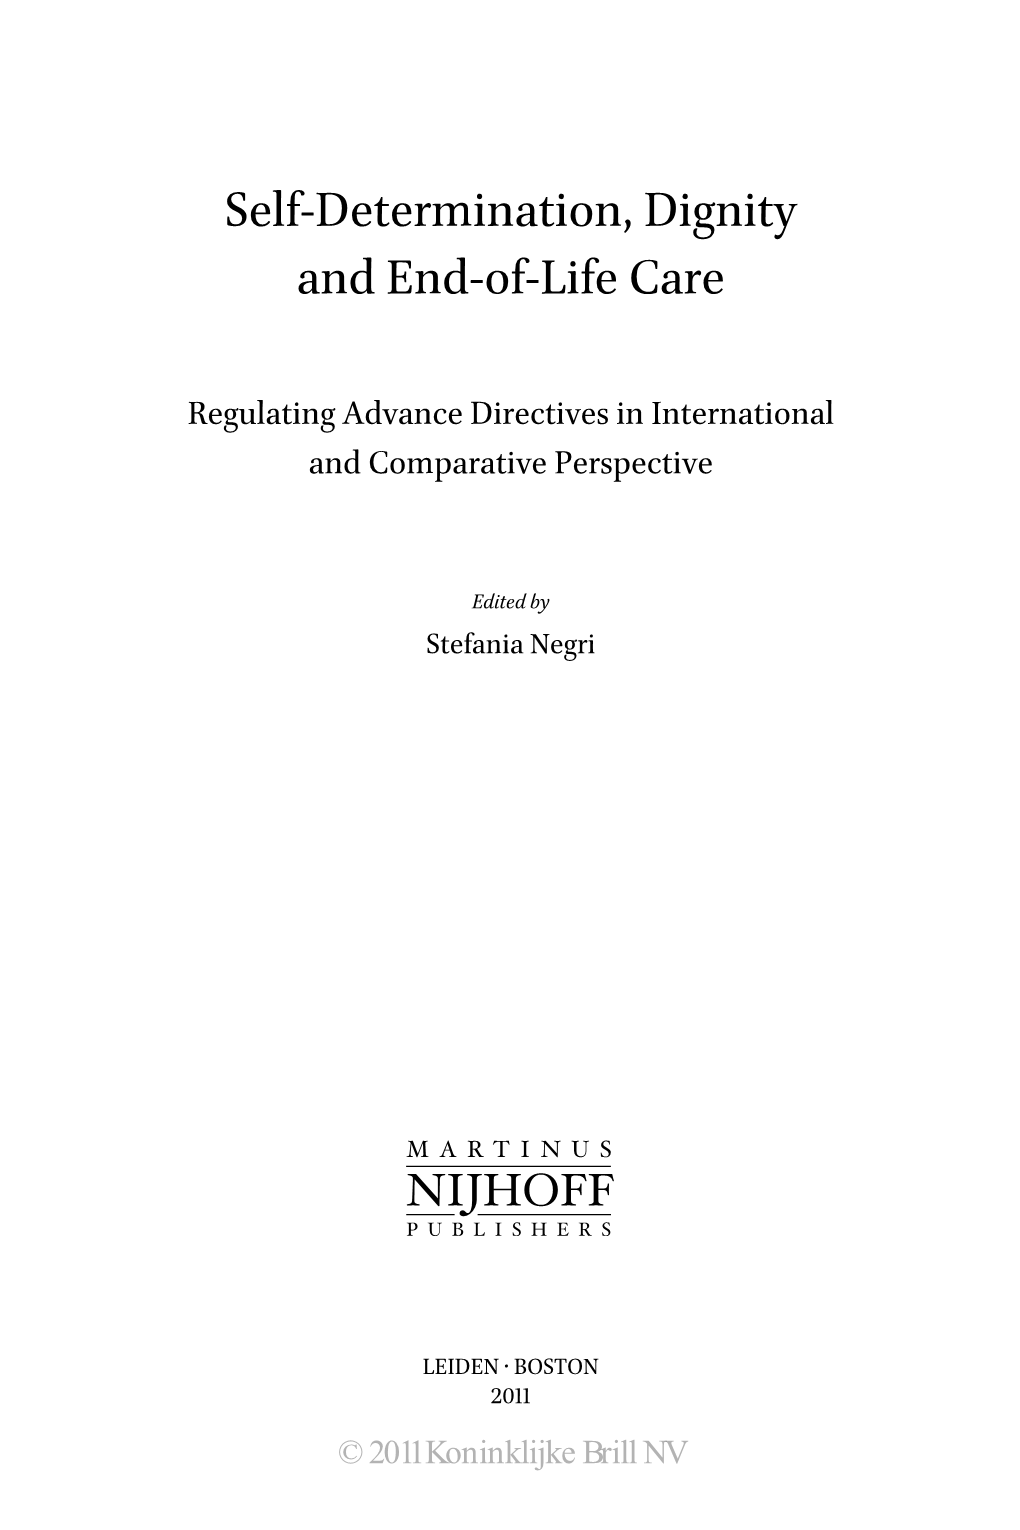 Self-Determination, Dignity and End-Of-Life Care